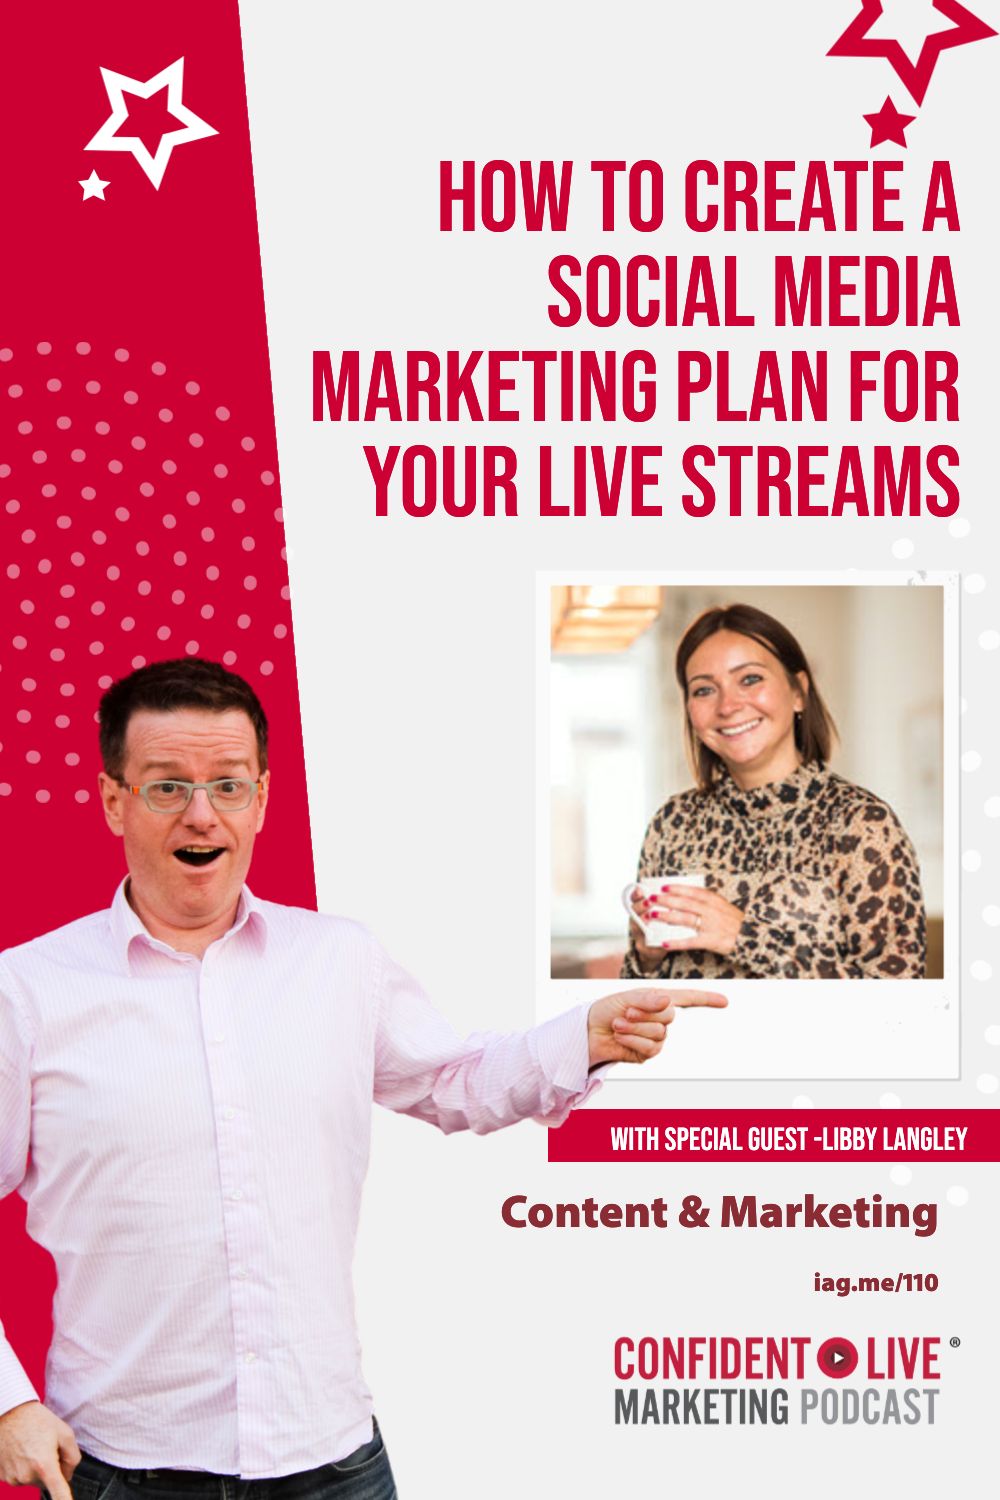 How to Create a Social Media Marketing Plan for your Live Streams